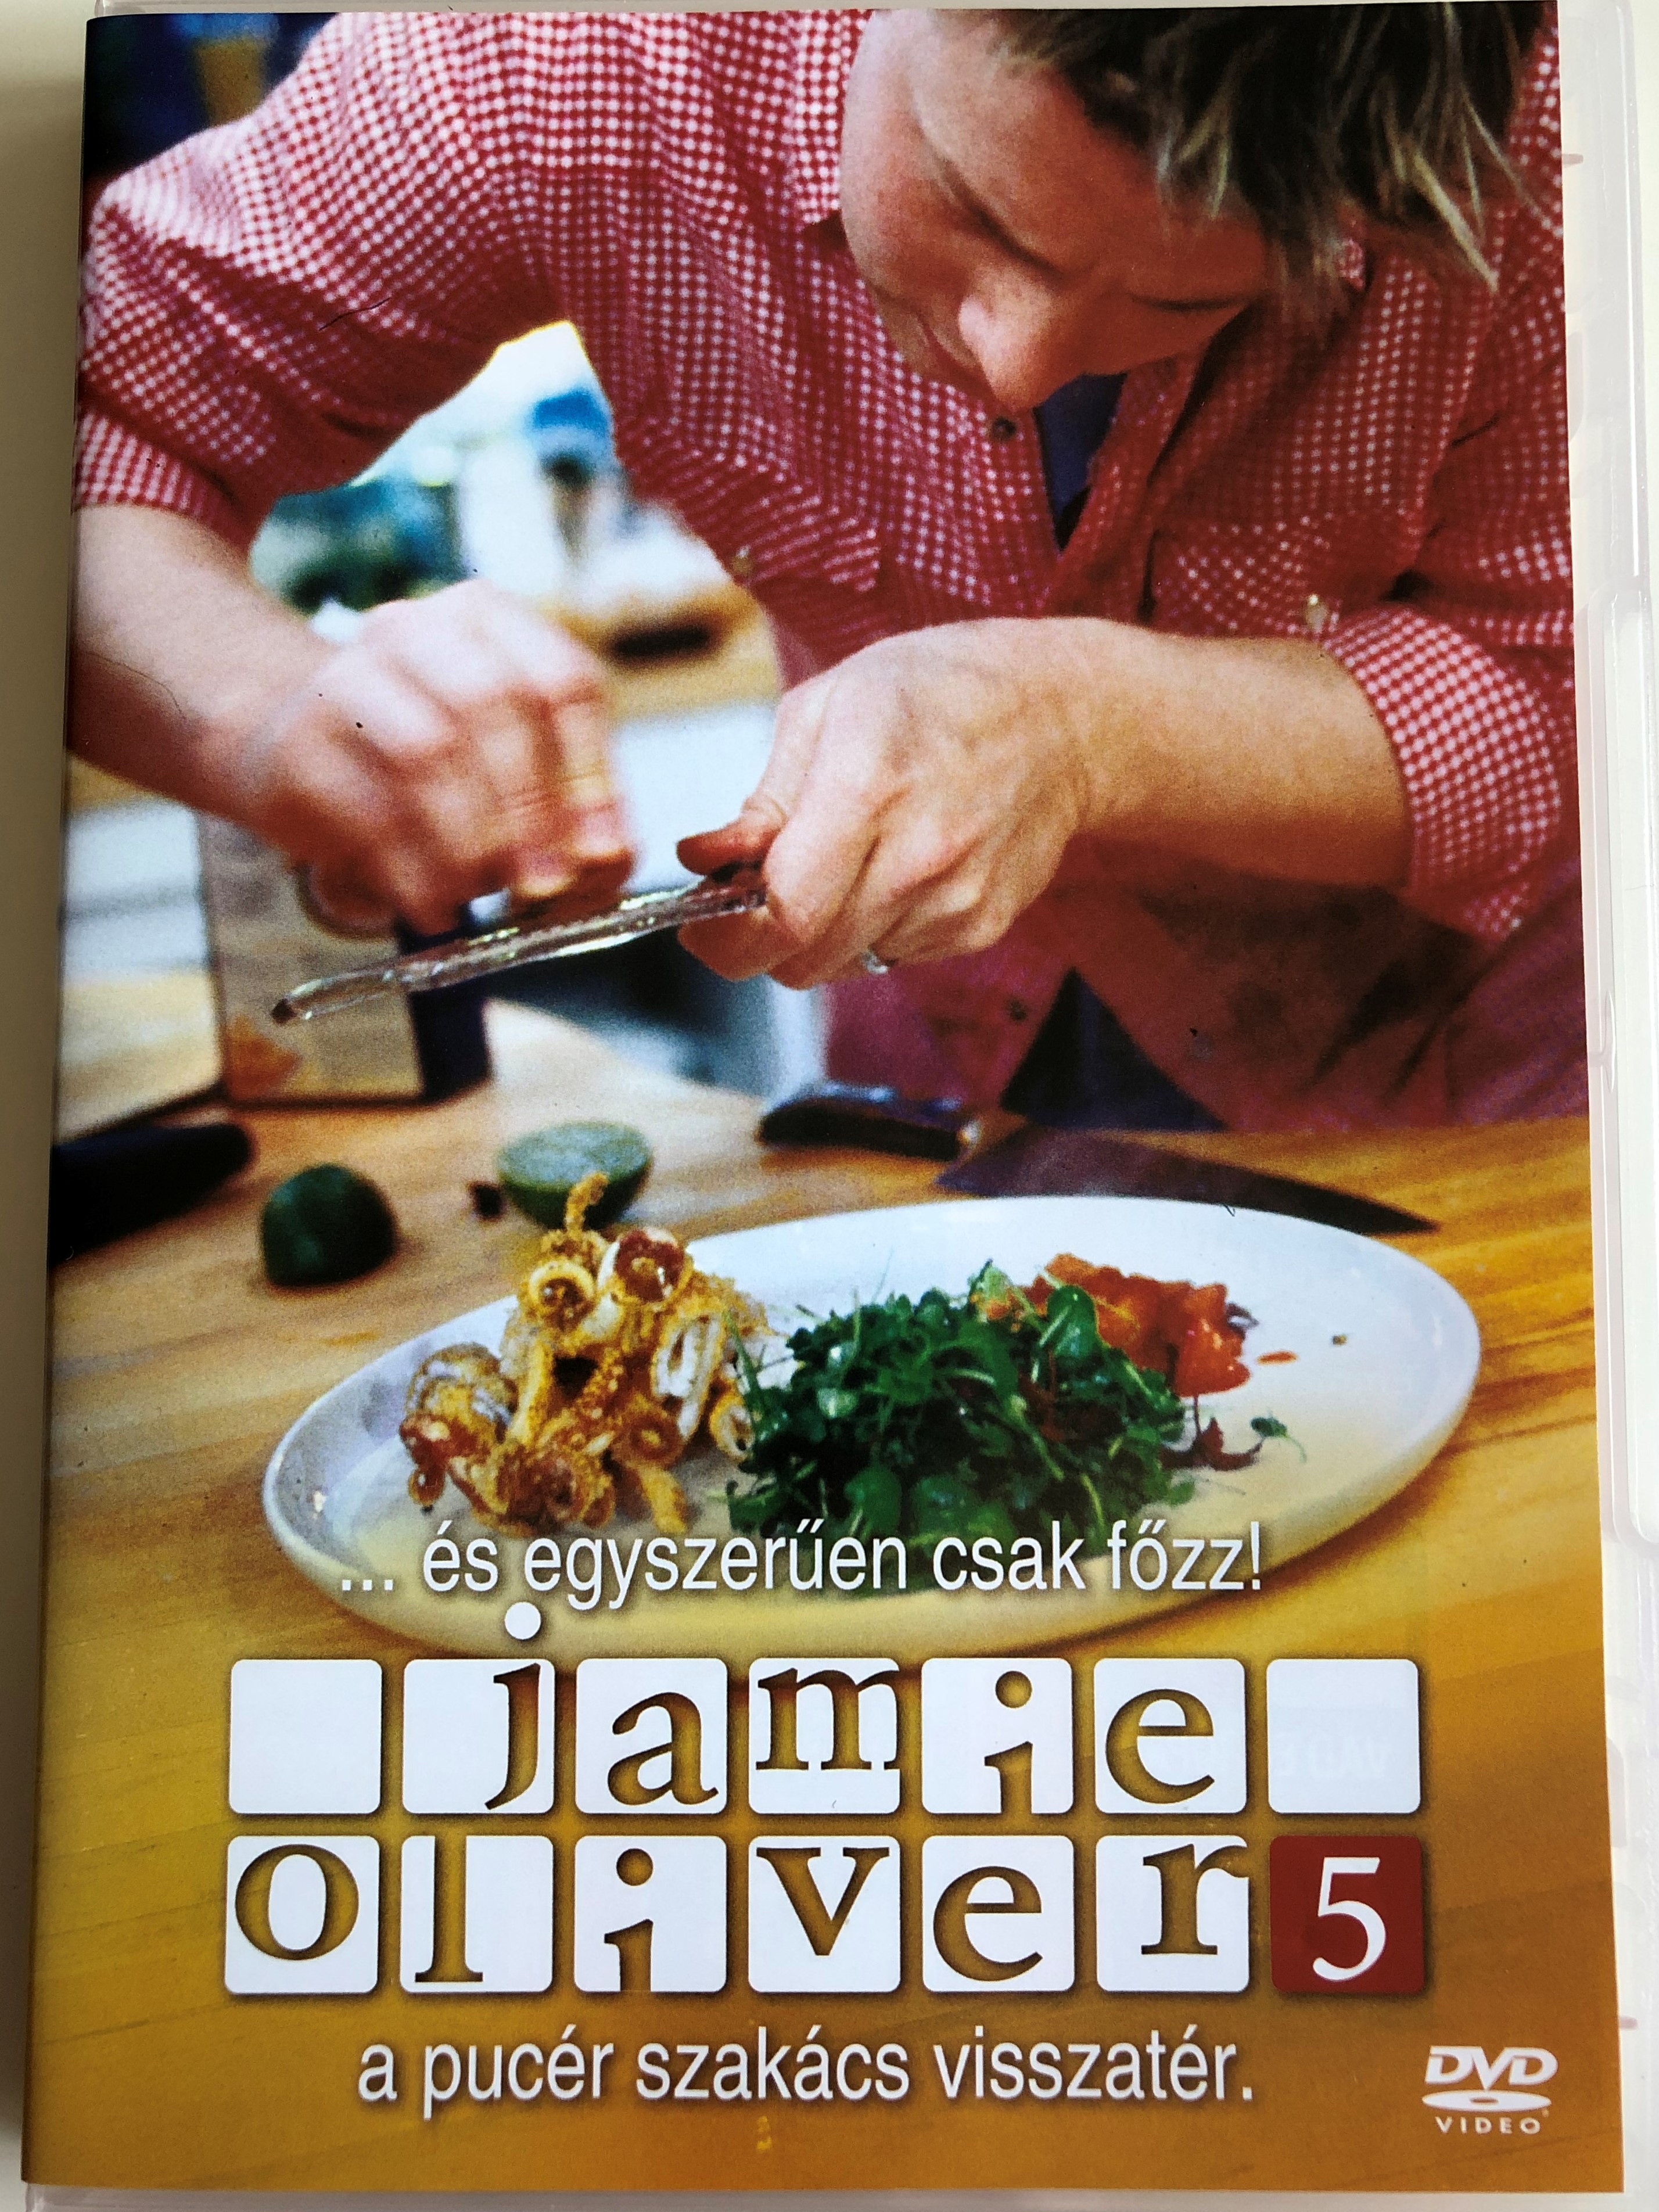 oliver-s-twist-the-naked-chef-dvd-2002-jamie-oliver-5-a-puc-r-szak-cs-visszat-r-directed-by-brian-klein-3-episodes-cooking-with-jamie-oliver-1-.jpg